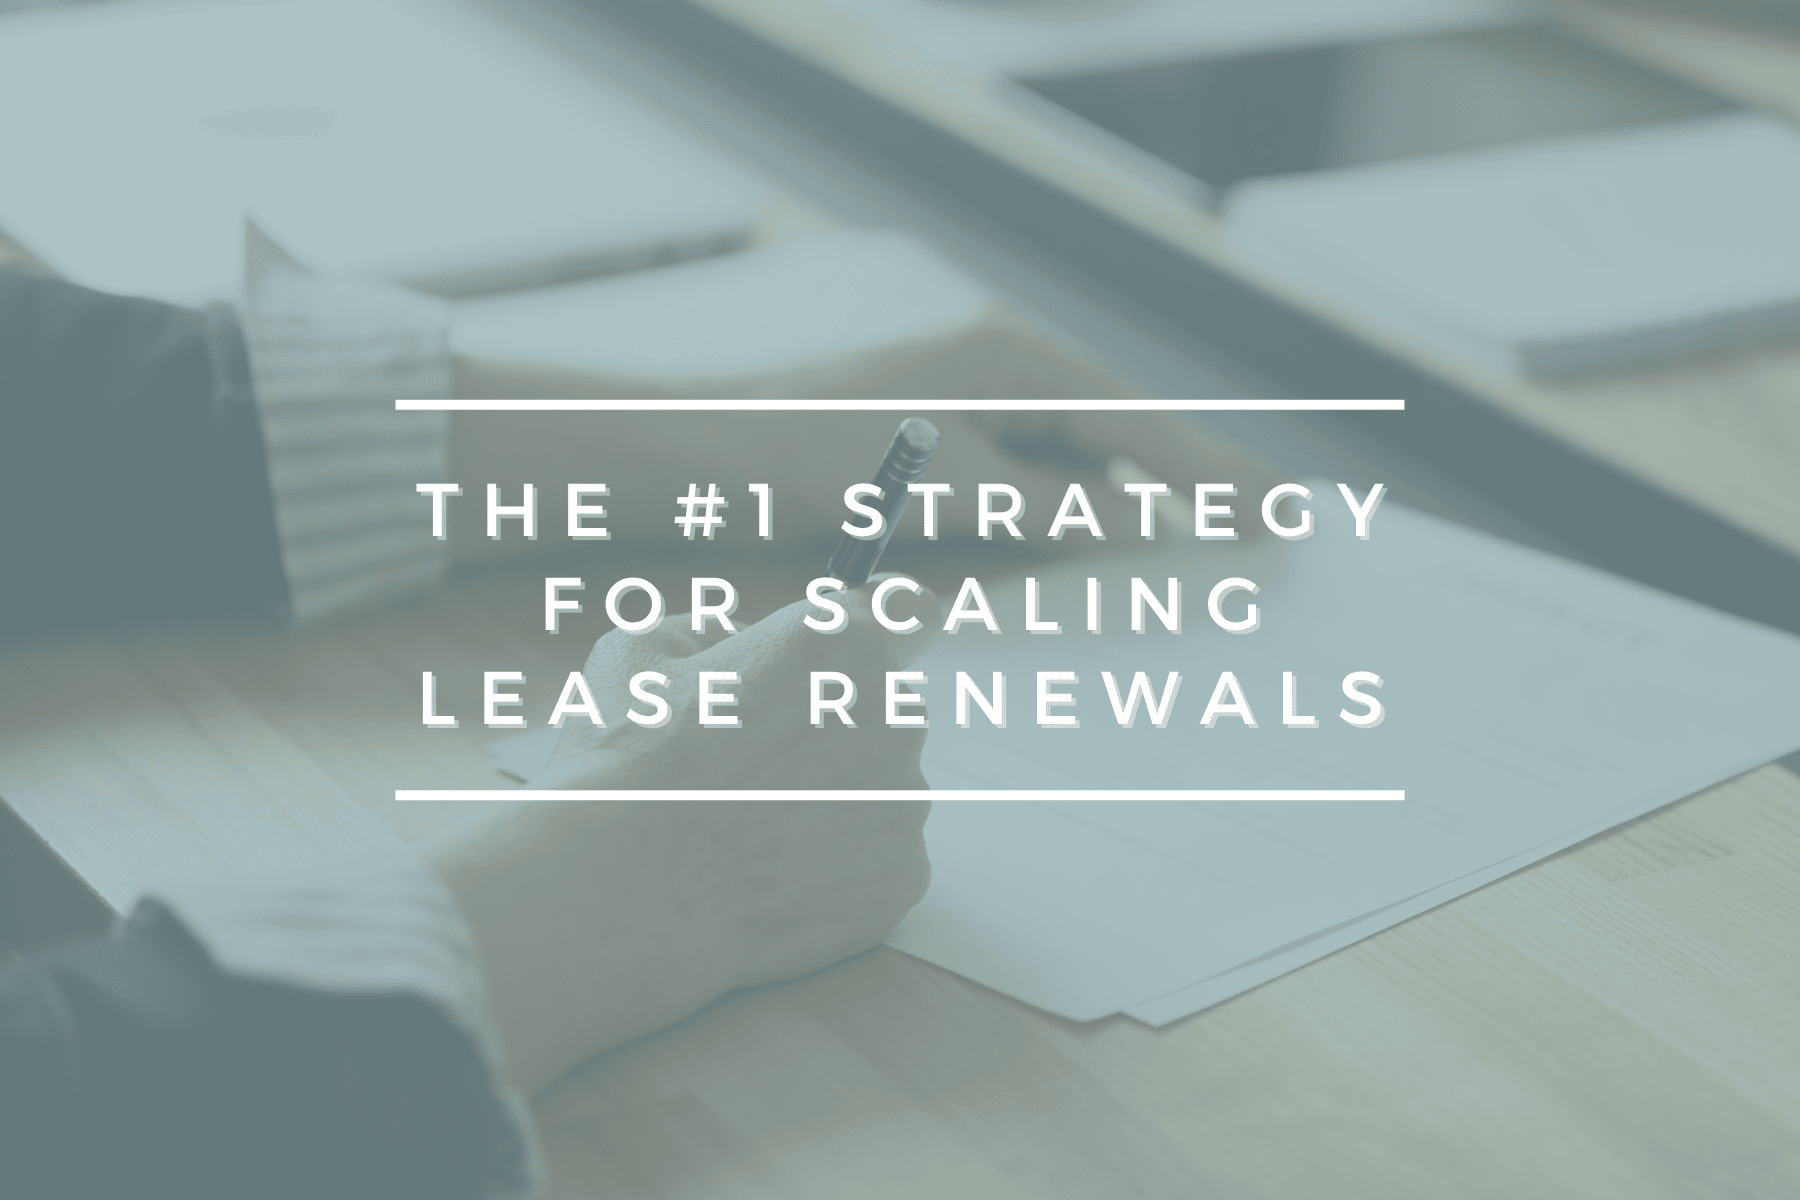 The #1 Strategy for Scaling Lease Renewals